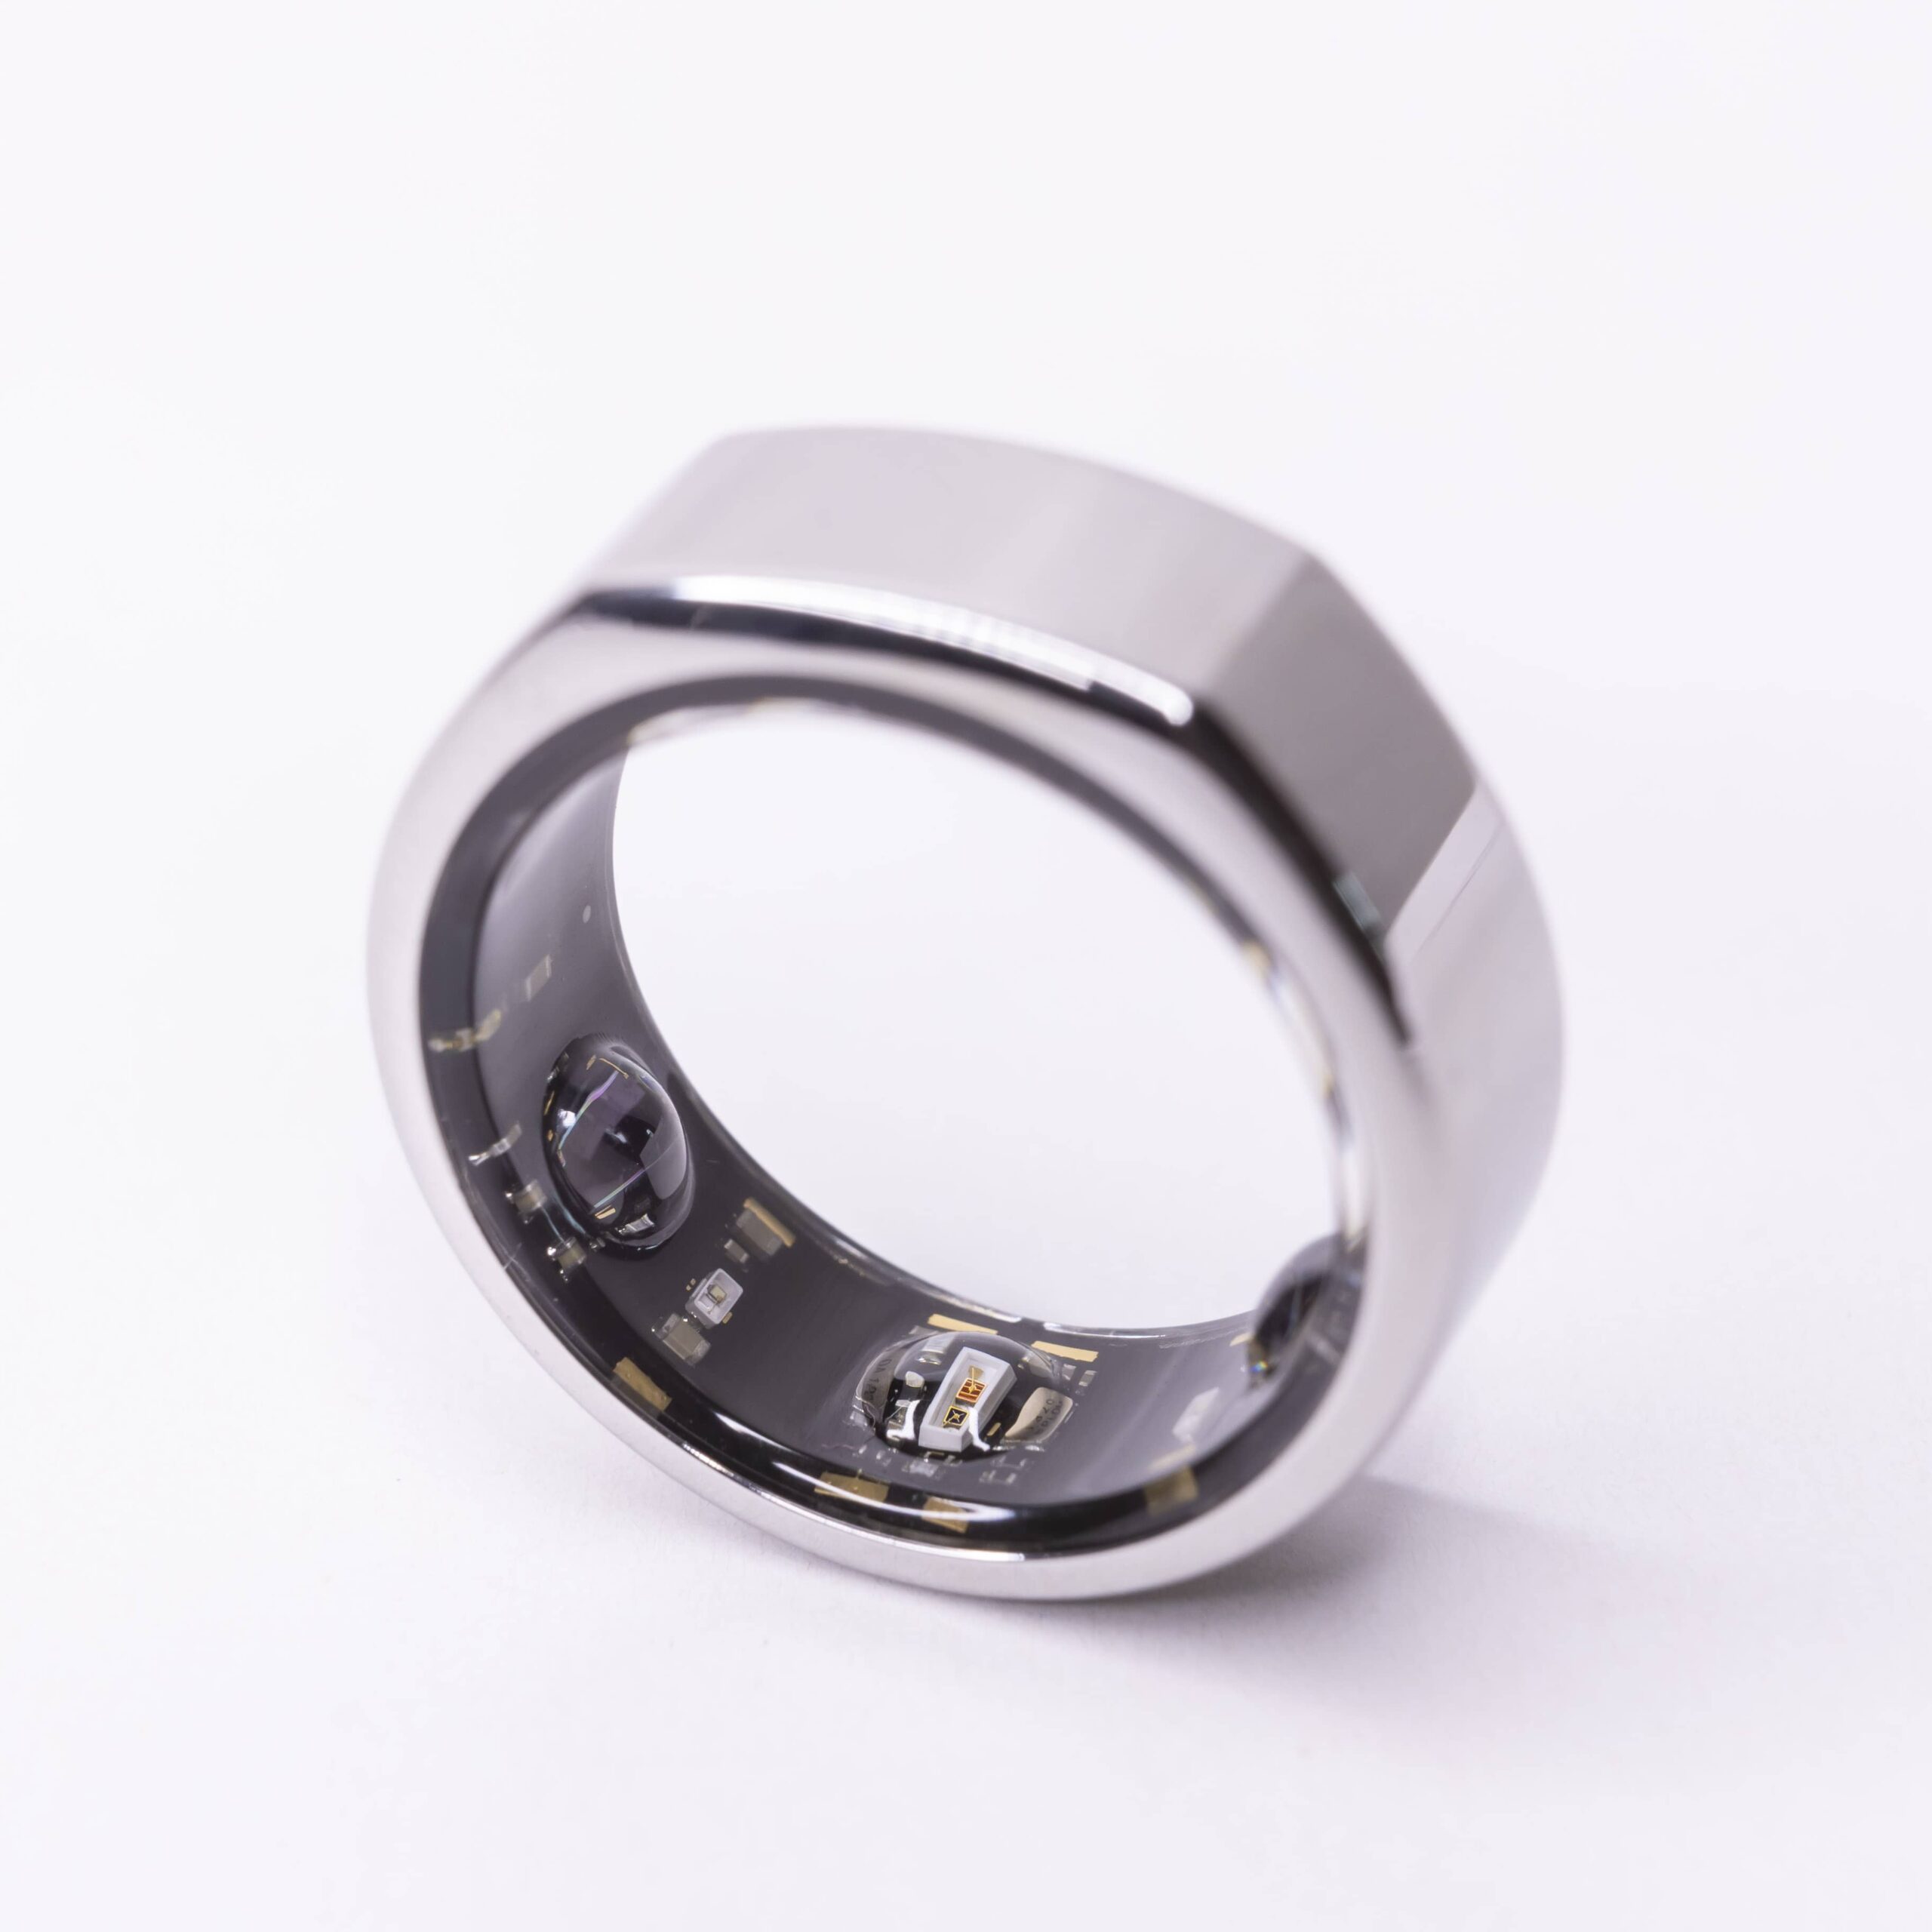 OURA RING US9 balance model silver